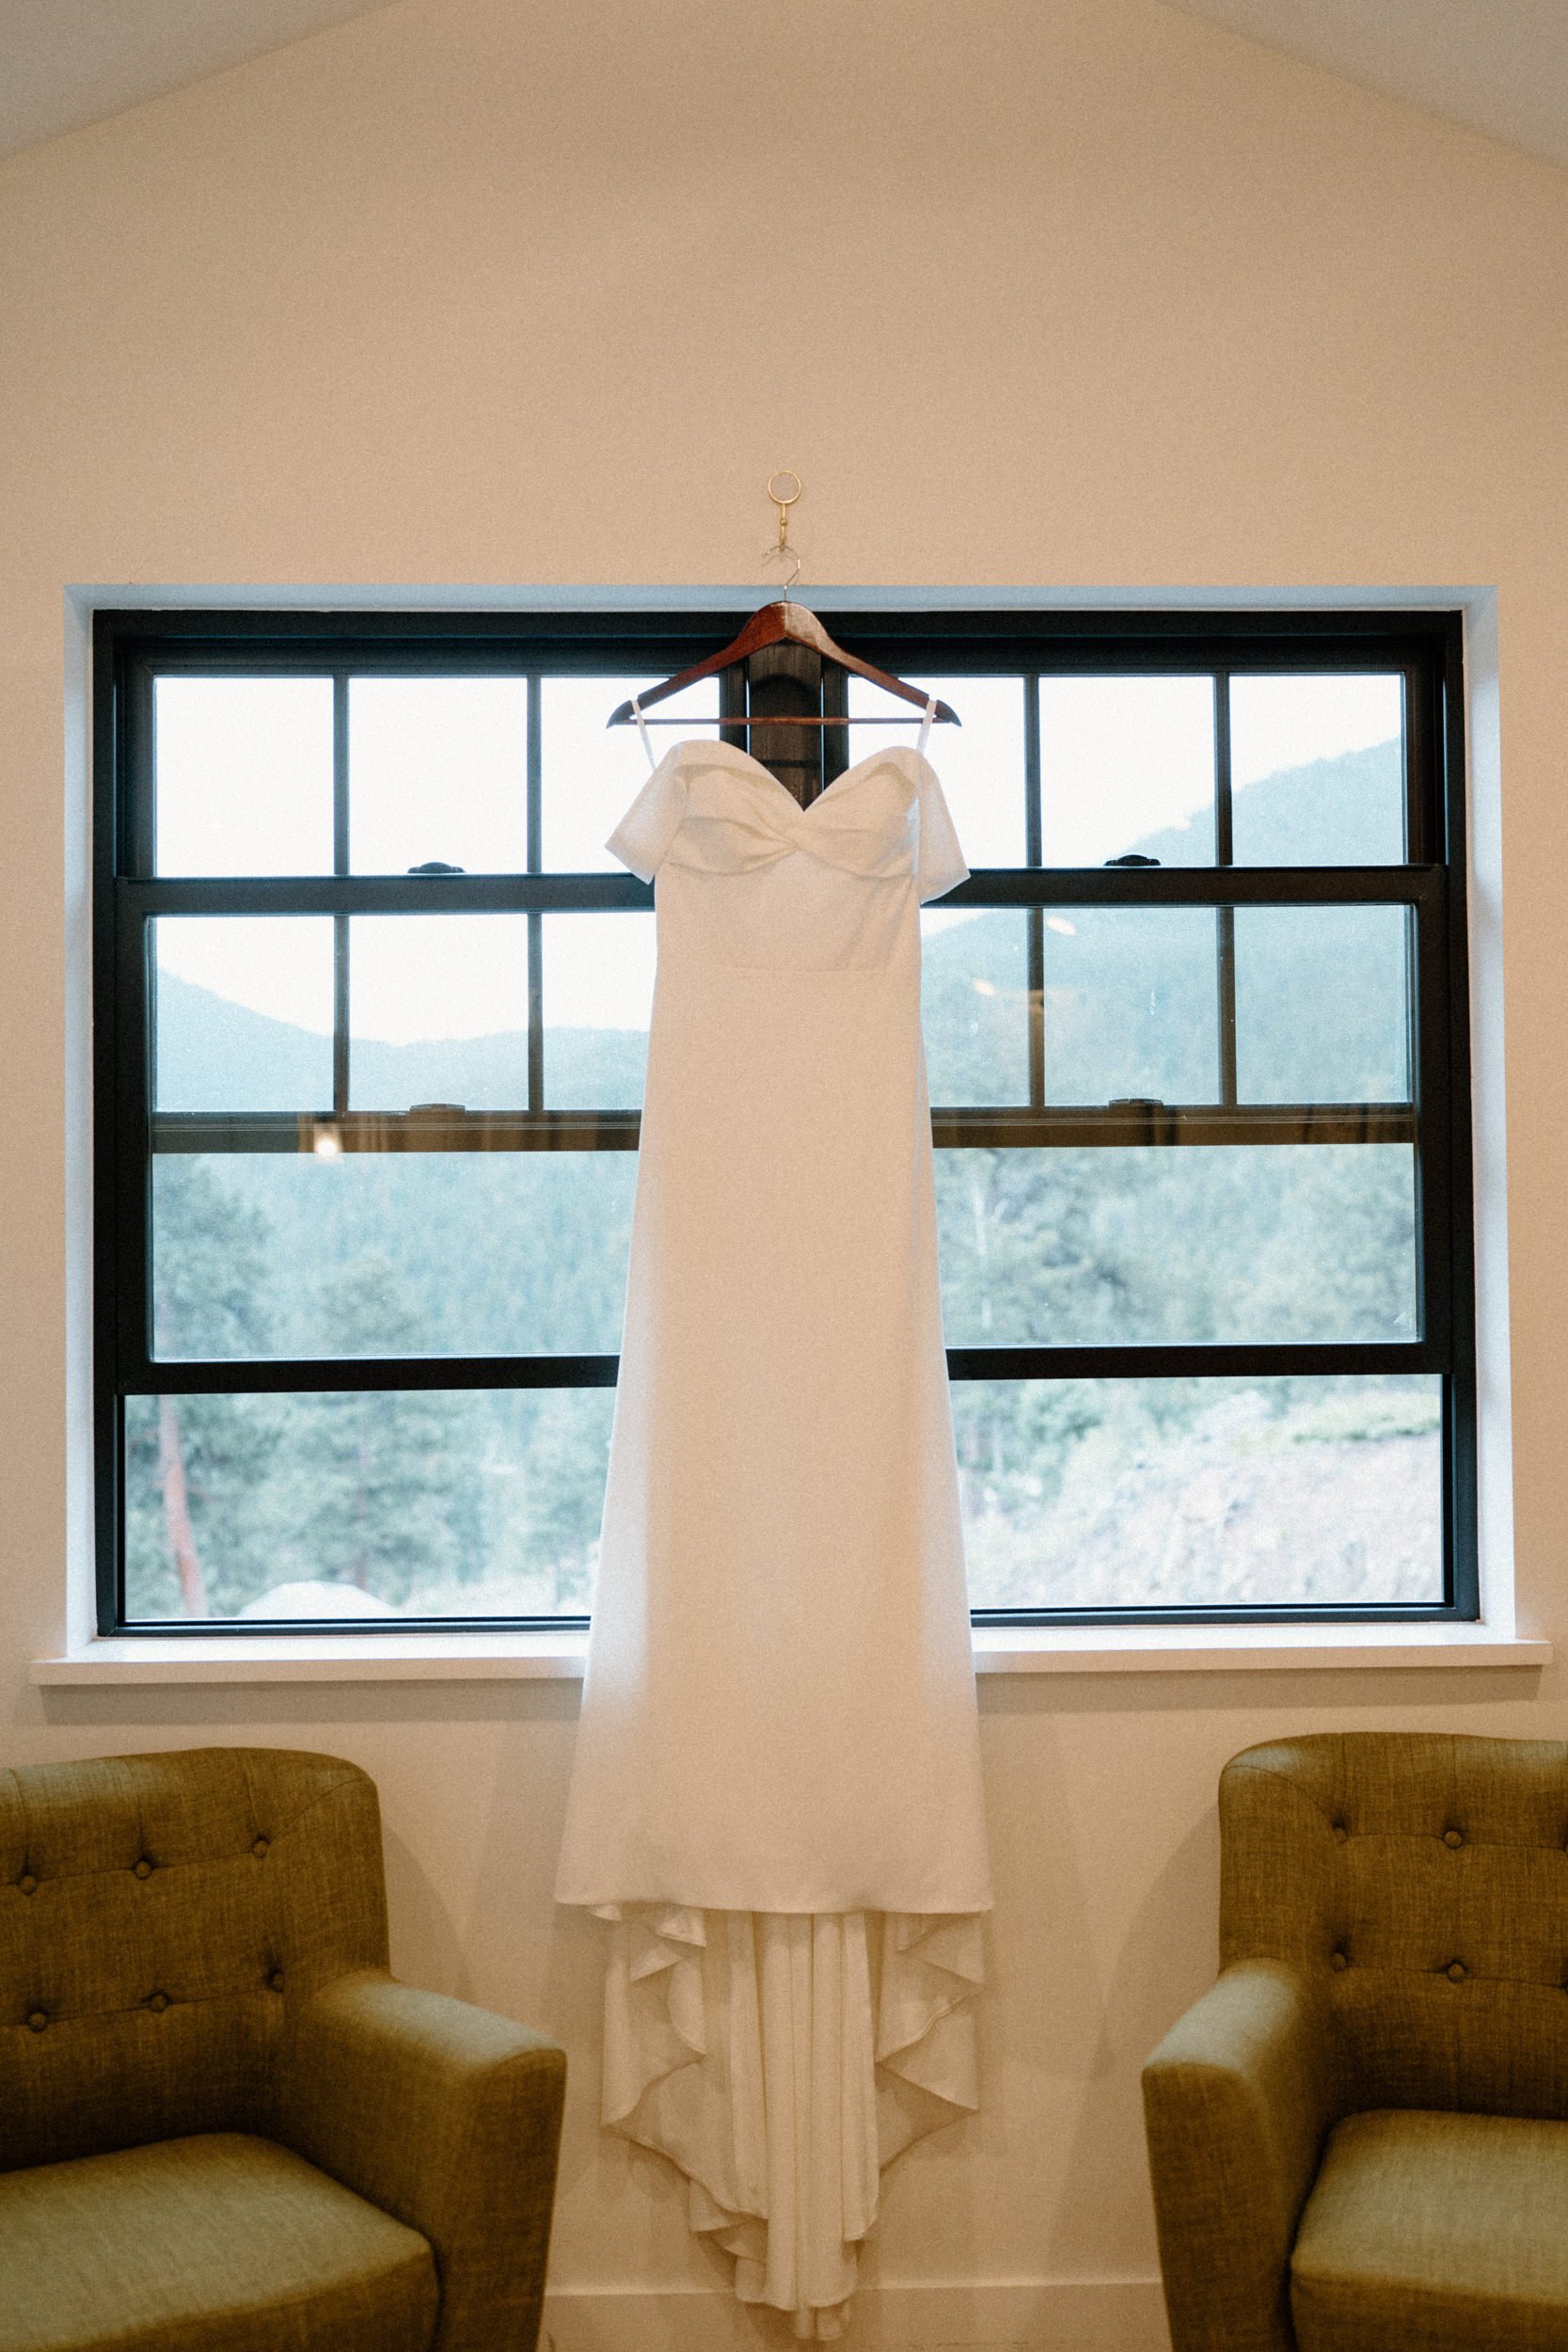 A white wedding dress hangs from the window 